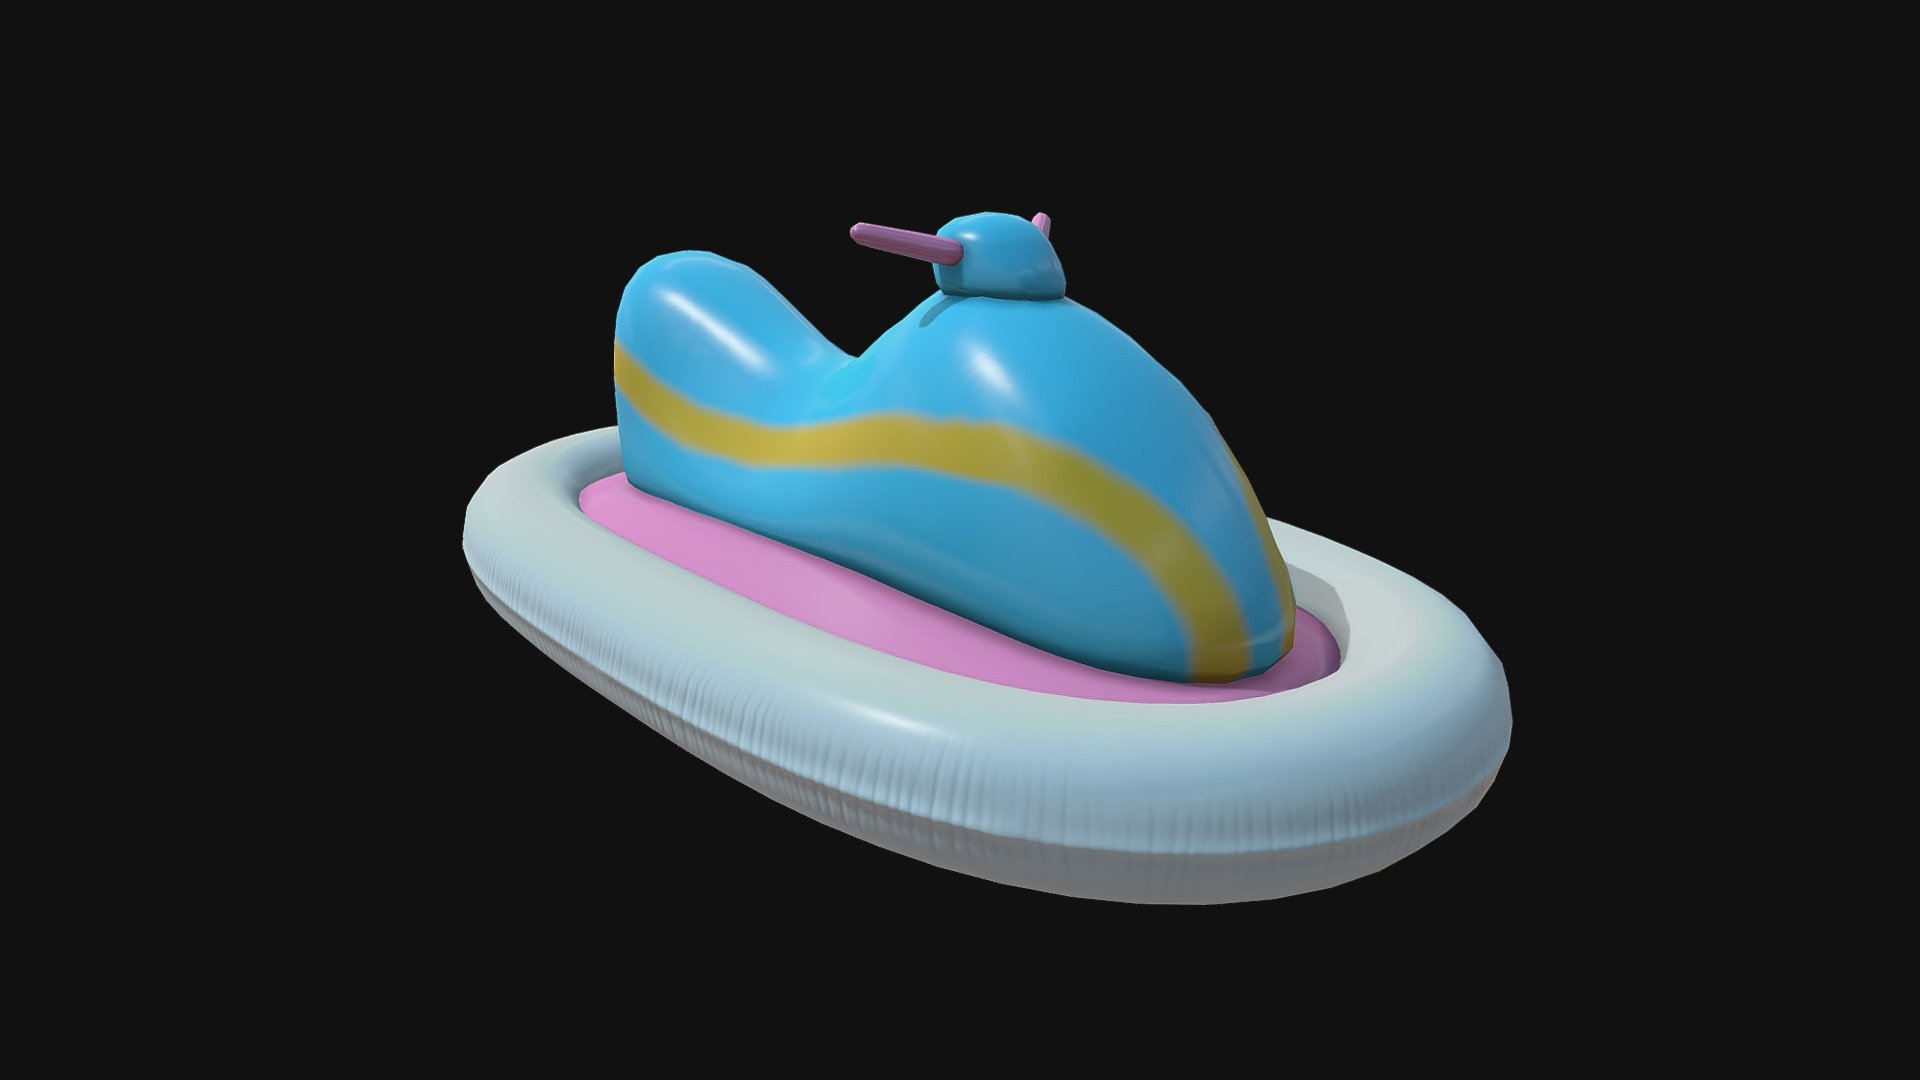 Low Poly Jet Ski Pool Float for your renders and games

Textures:

Diffuse color, Roughness, Normal

All textures are 2K

Files Formats:

Blend

Fbx

Obj - Jet Ski Pool Float - Buy Royalty Free 3D model by Vanessa Araújo (@vanessa3d) 3d model